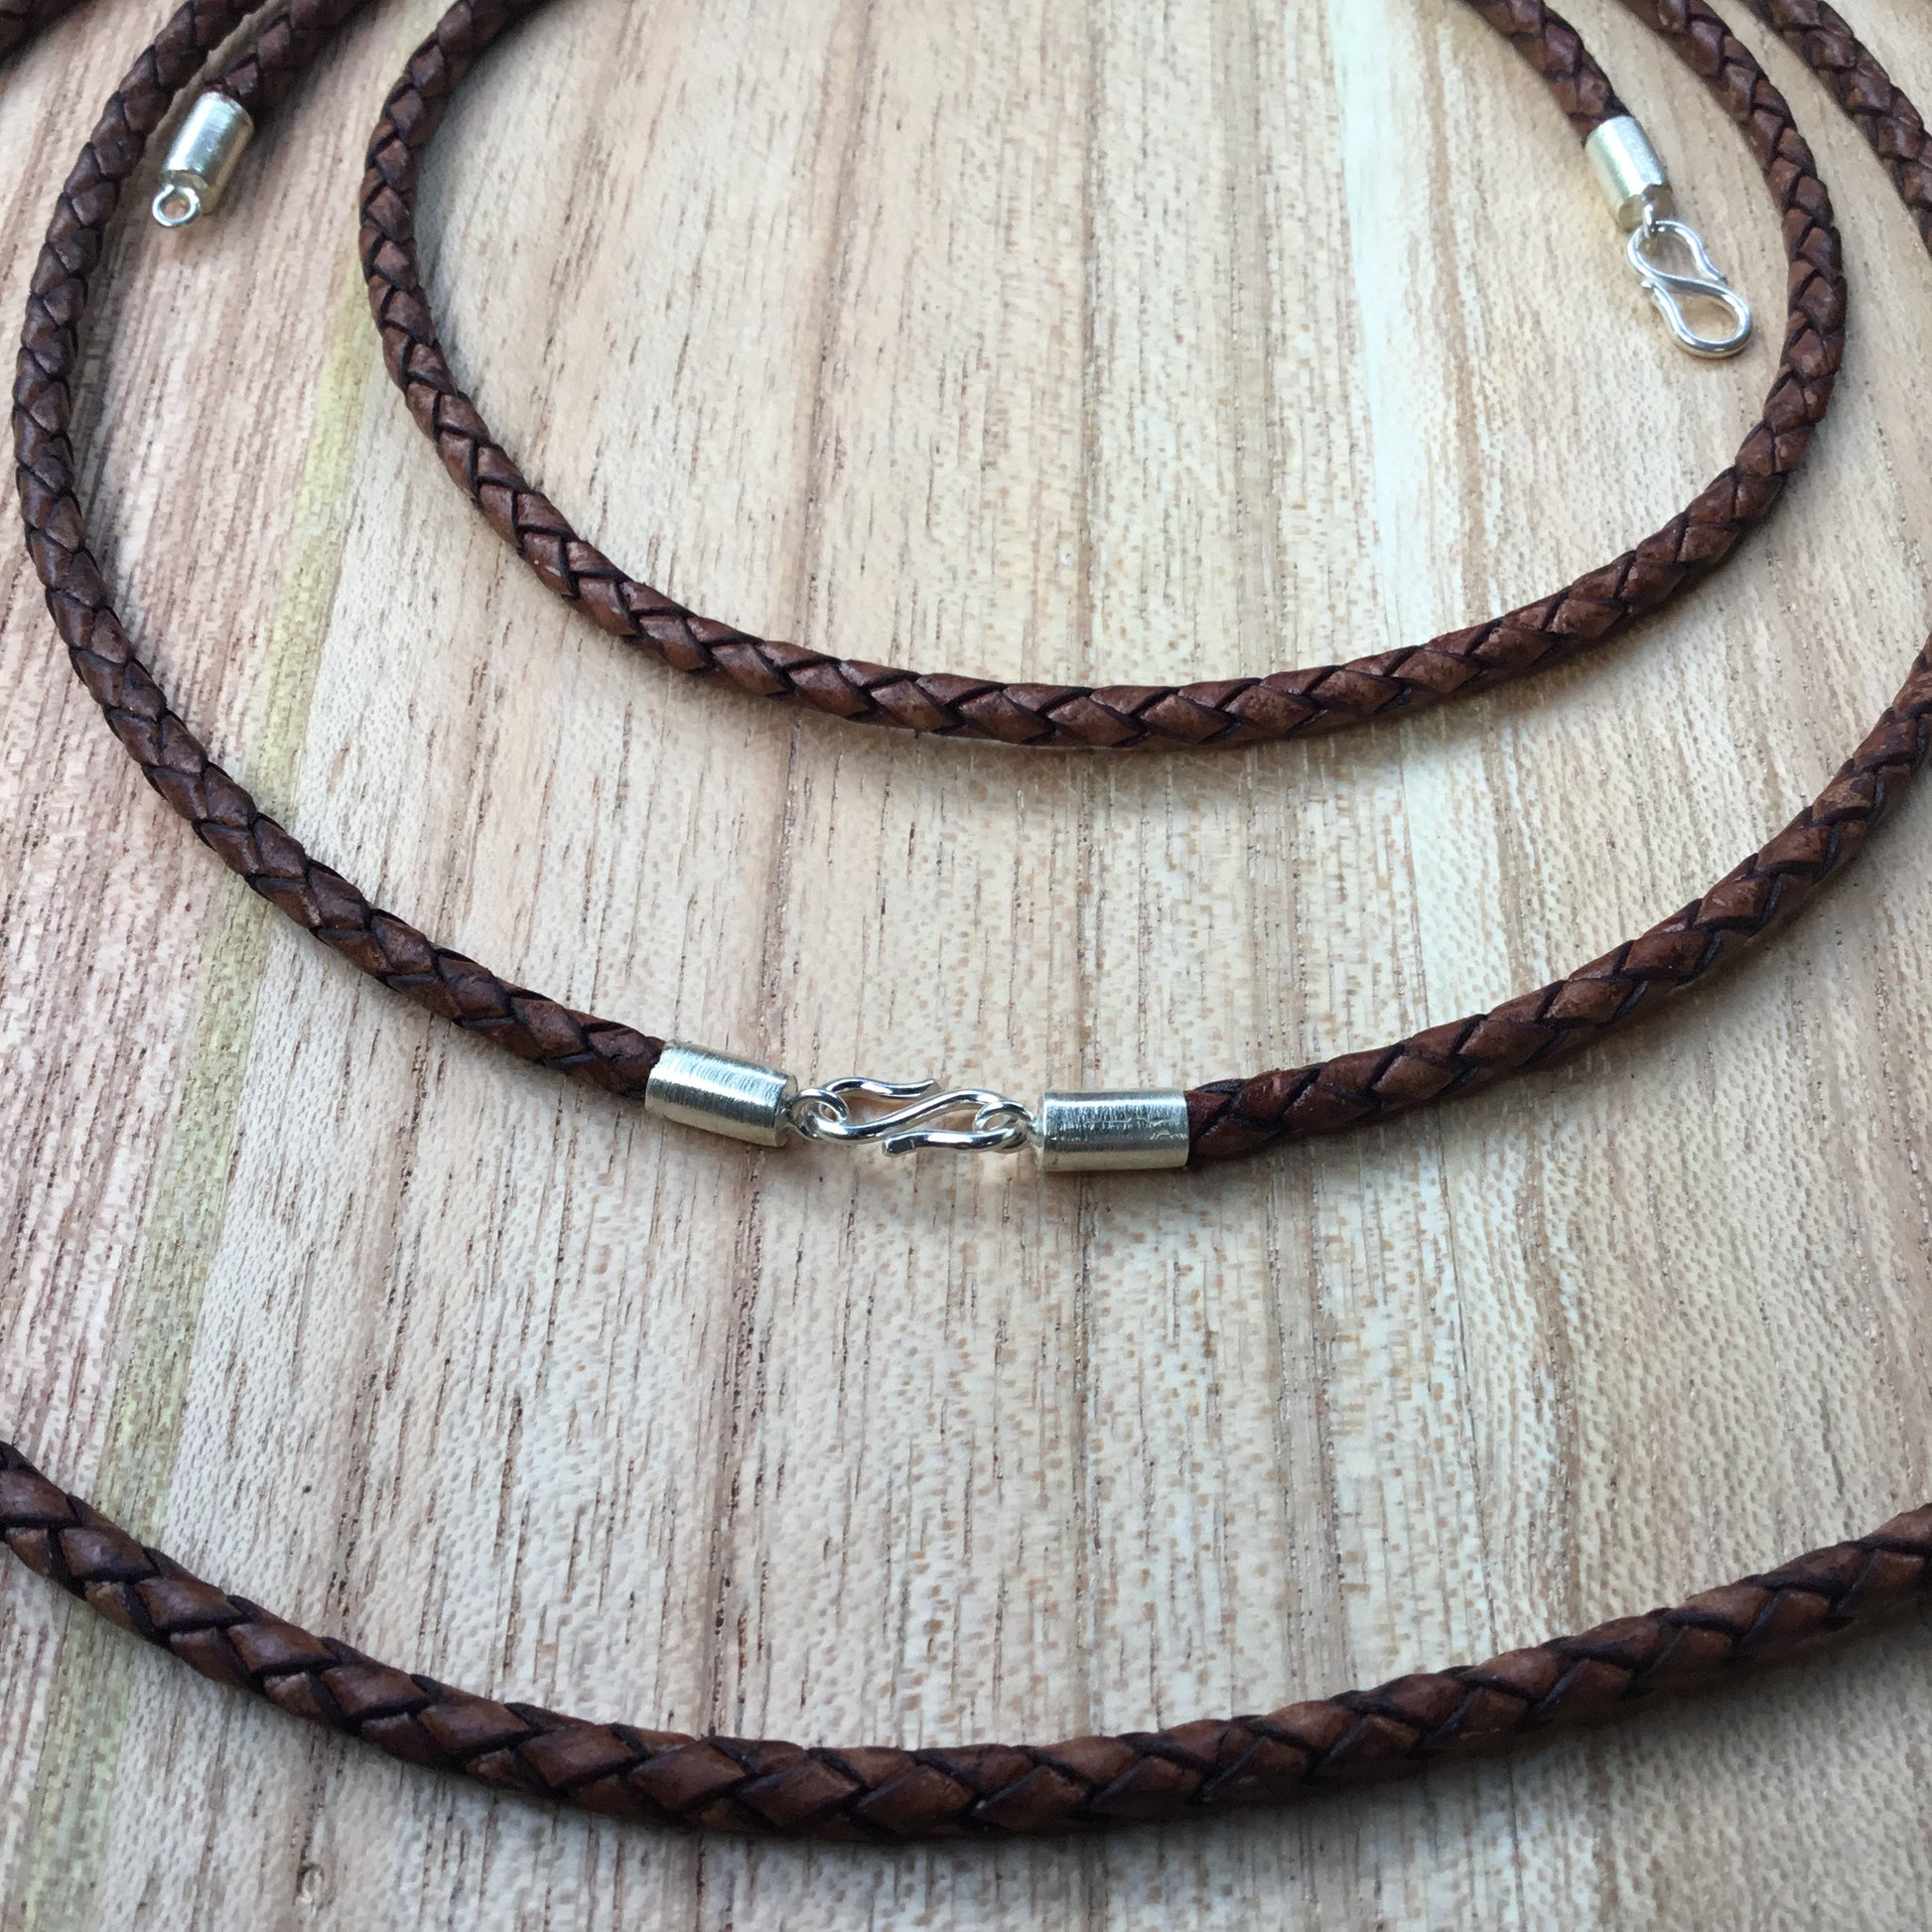 The Leather Cord Necklace